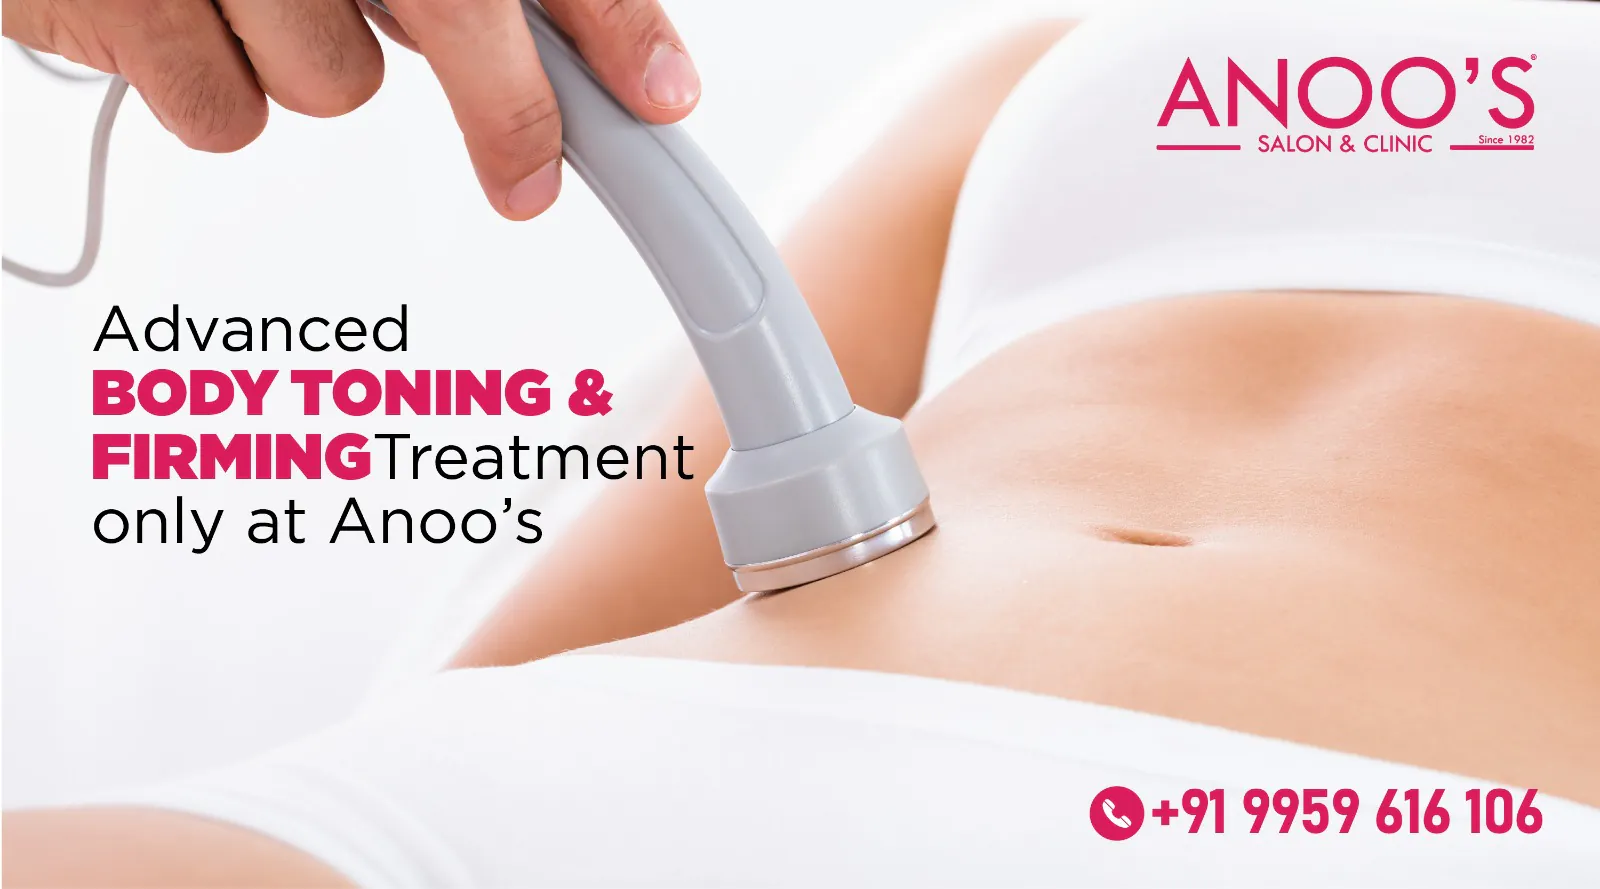 Busting 5 Myths About Body Firming and Toning| Anoos